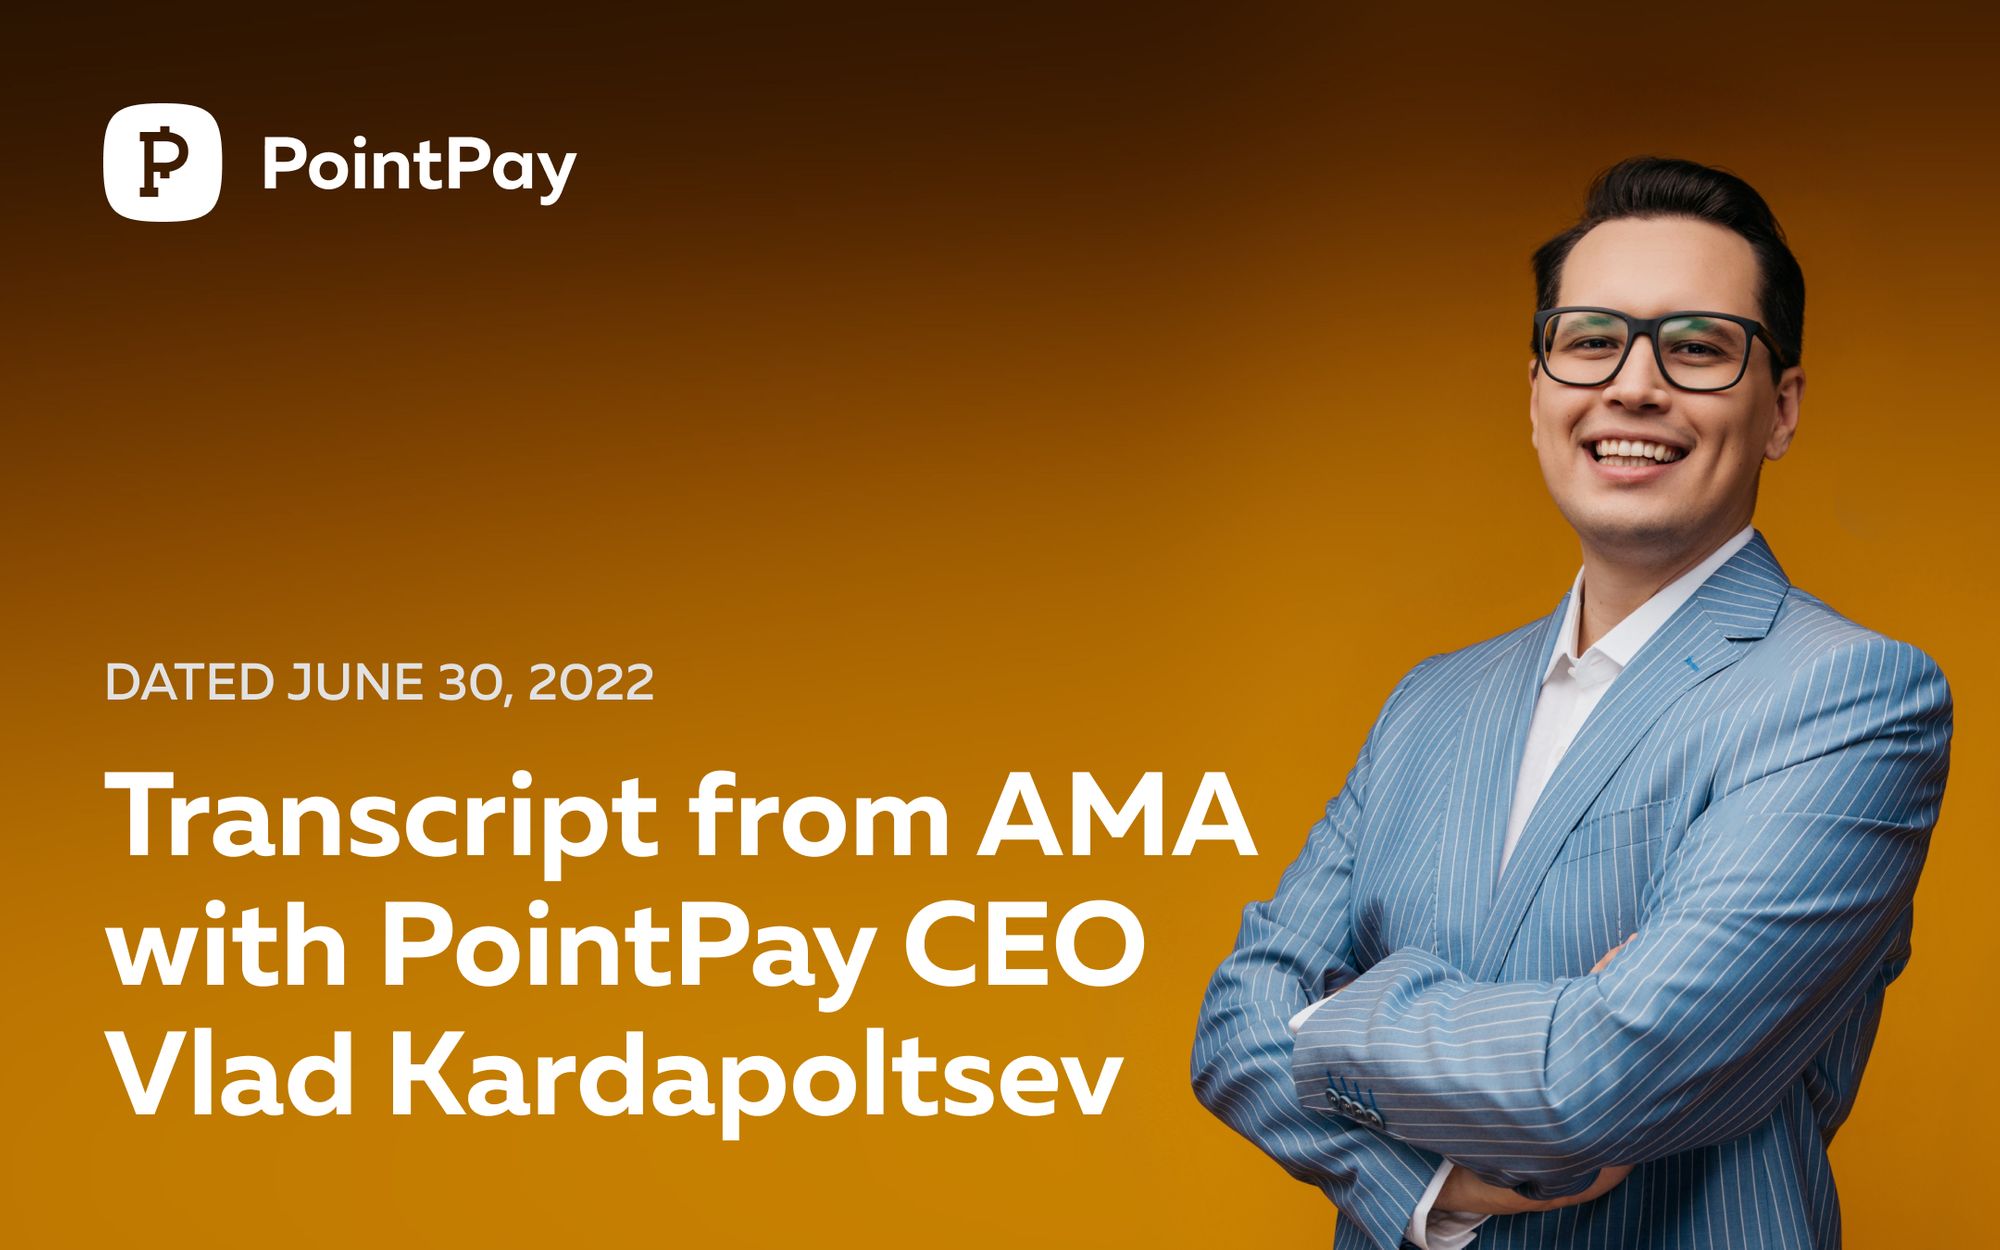 Transcript of AMA with CEO of PointPay — Vladimir Kardapoltsev